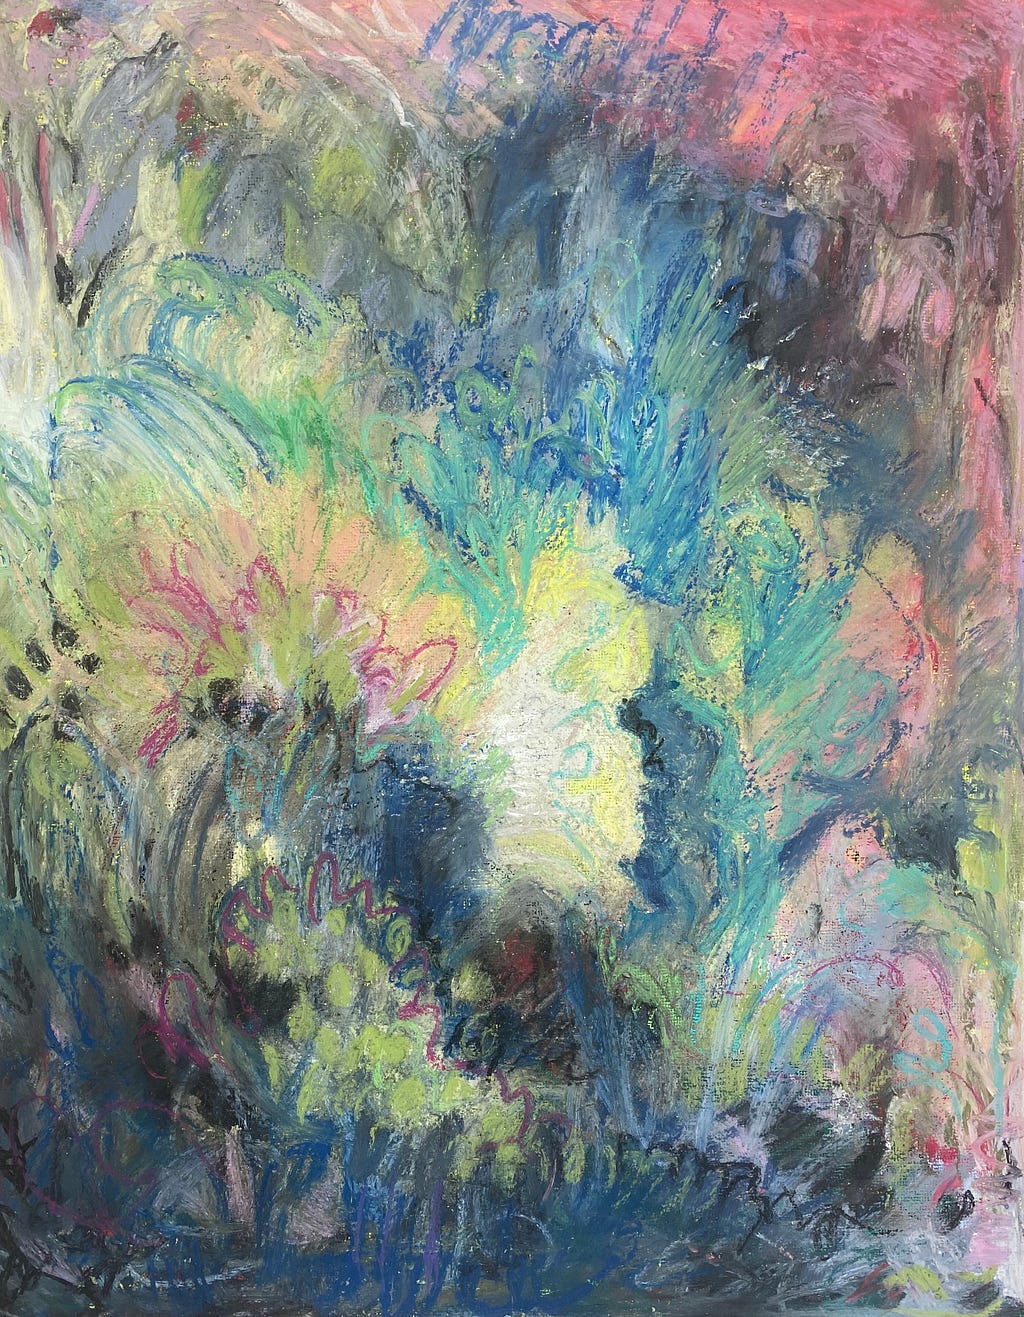 Colorful pastel painting by the author that has swirls and leafy shapes blooming upward out of dark shadows.